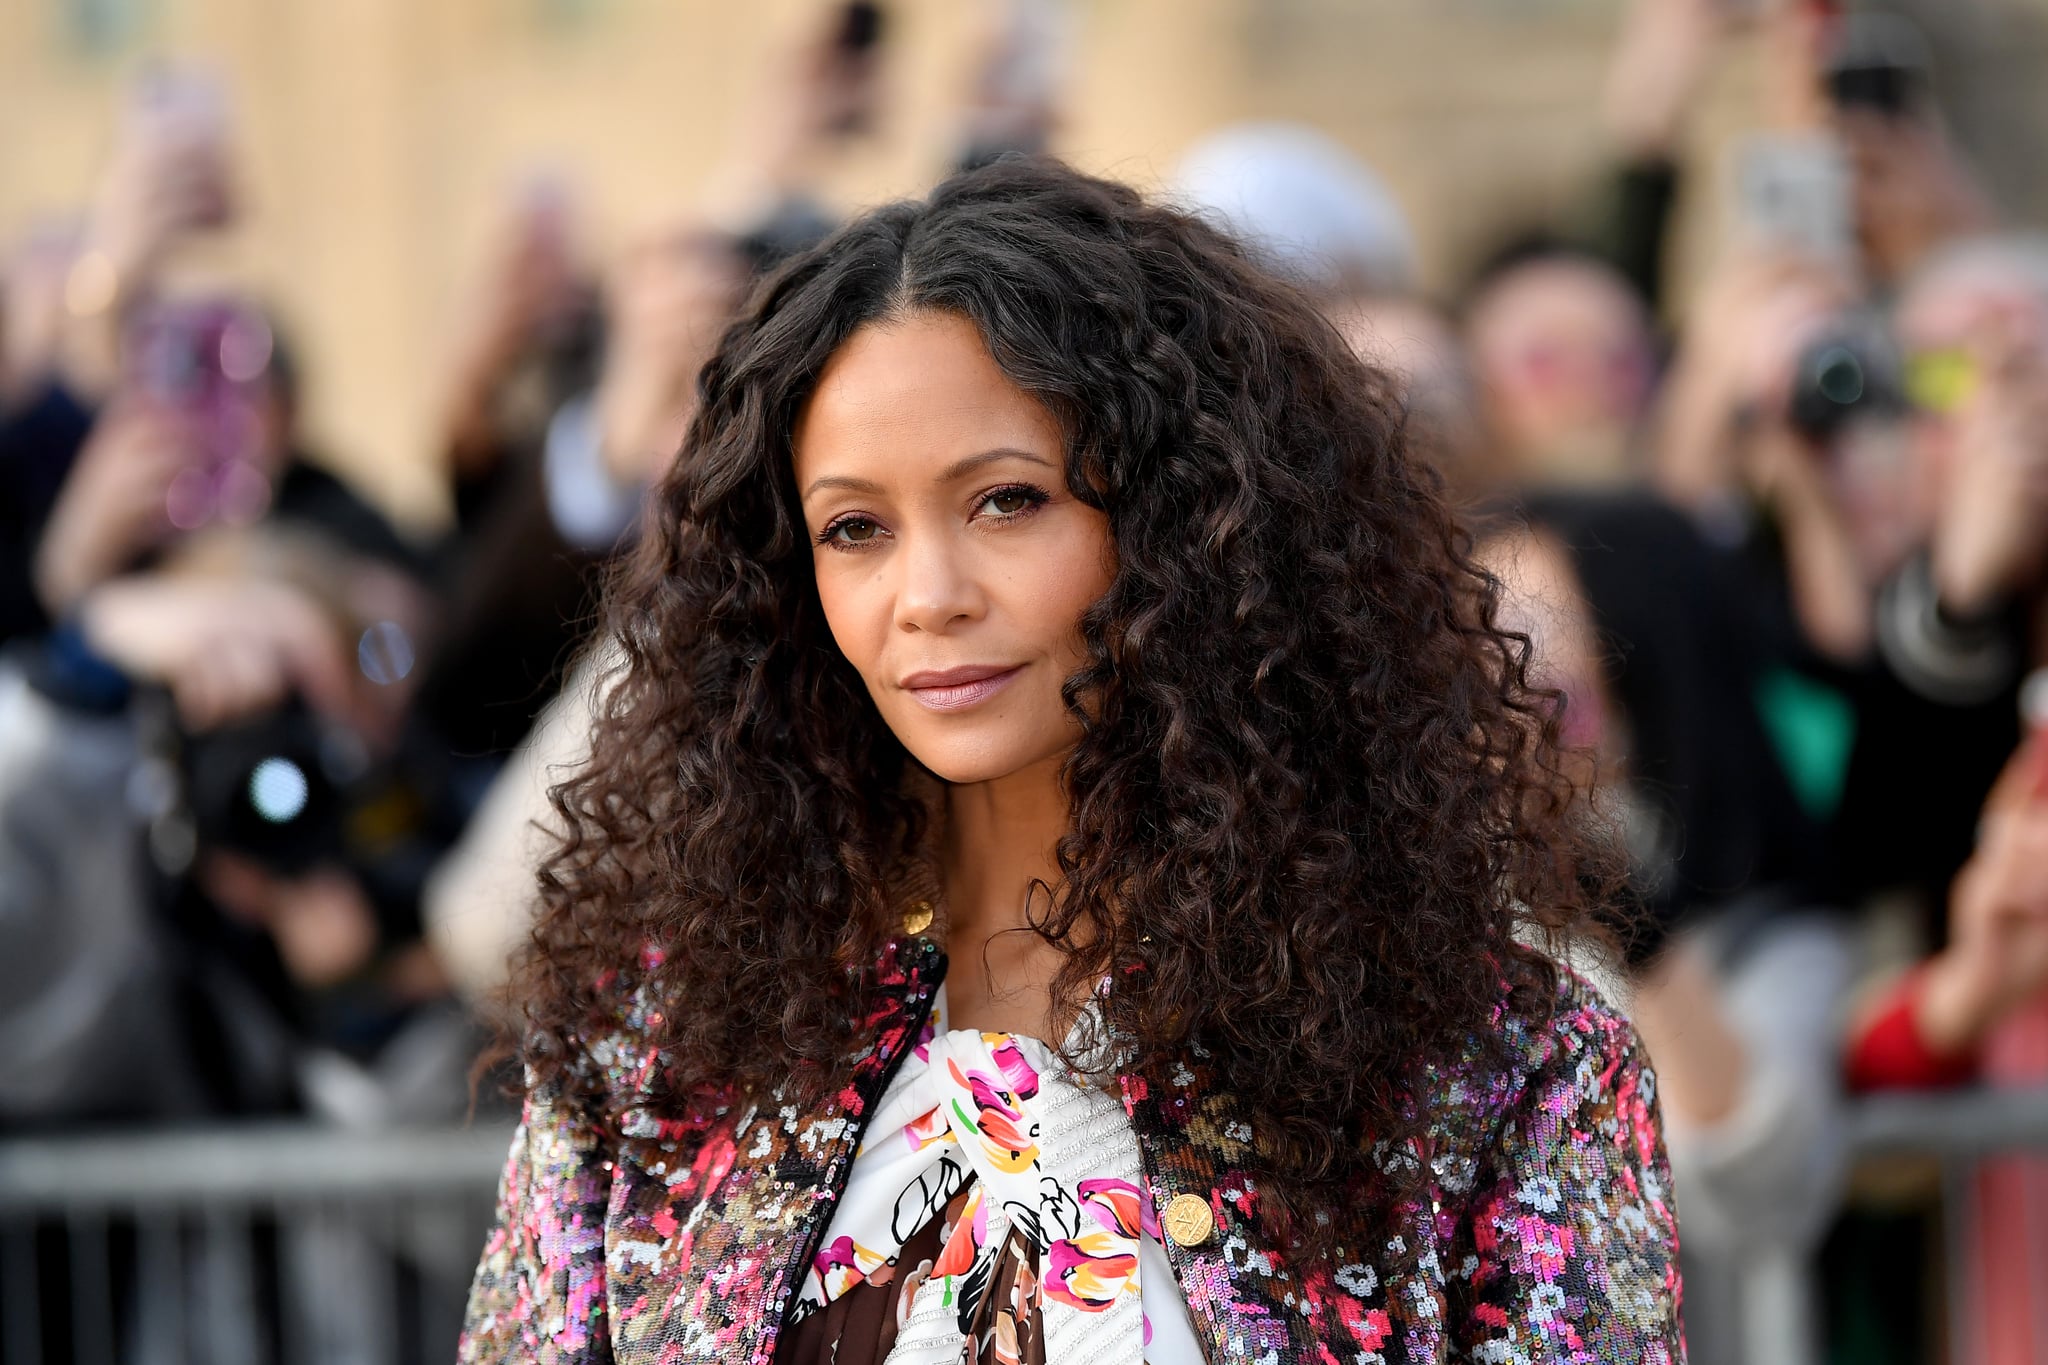 PARIS, FRANCE - MARCH 05: Thandie Newton attends the Louis Vuitton show as part of the Paris Fashion Week Womenswear Fall/Winter 2019/2020  on March 05, 2019 in Paris, France. (Photo by Jacopo Raule/Getty Images)